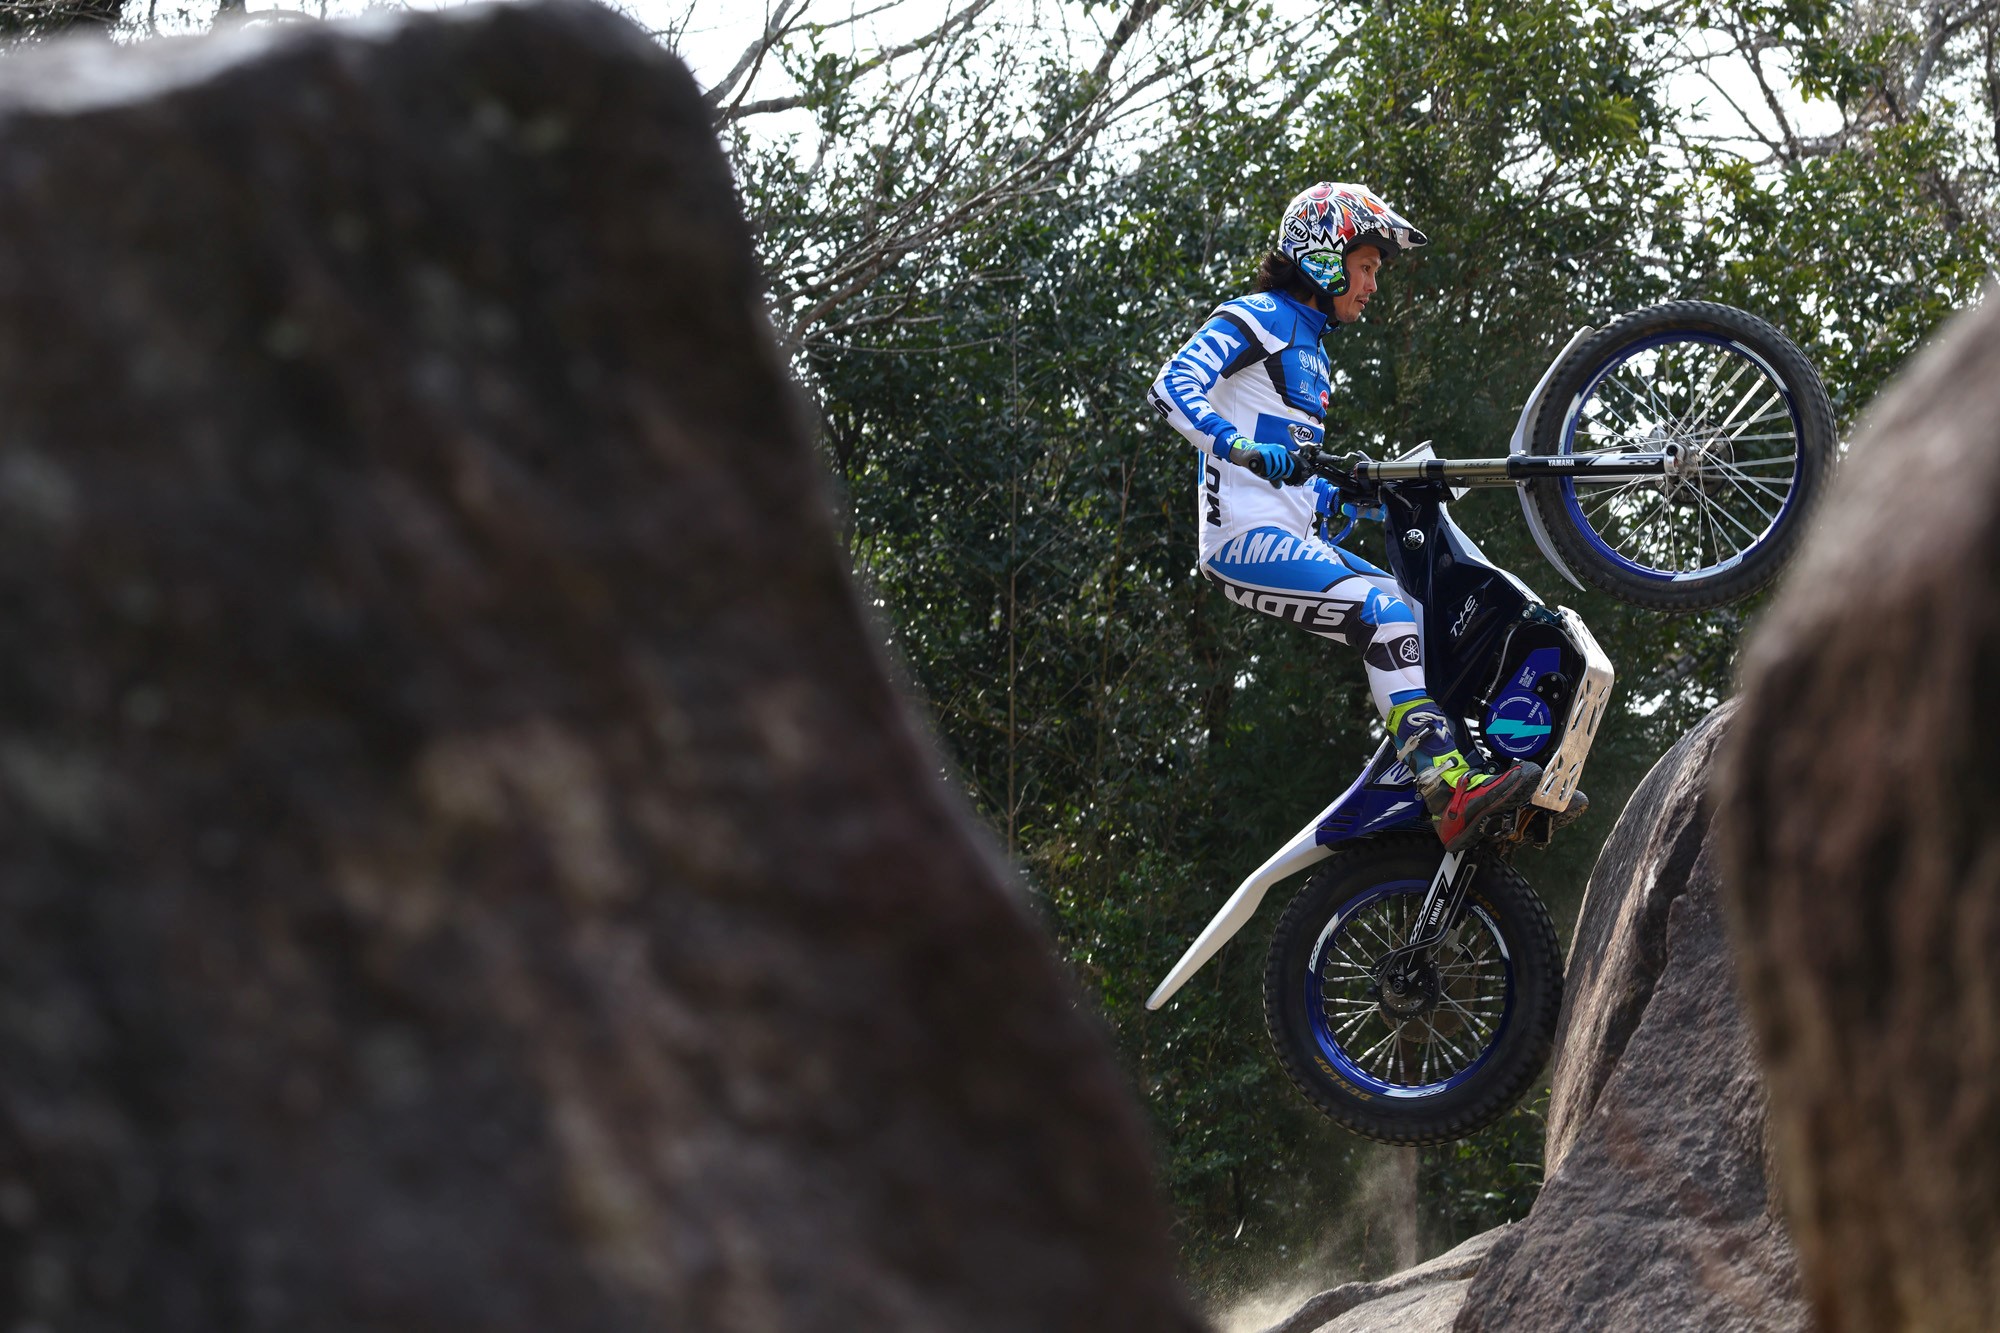 Kuroyama Kenichi, one of Japan’s best trials riders, will compete in the Trial World Championship with the TY-E 2.0.